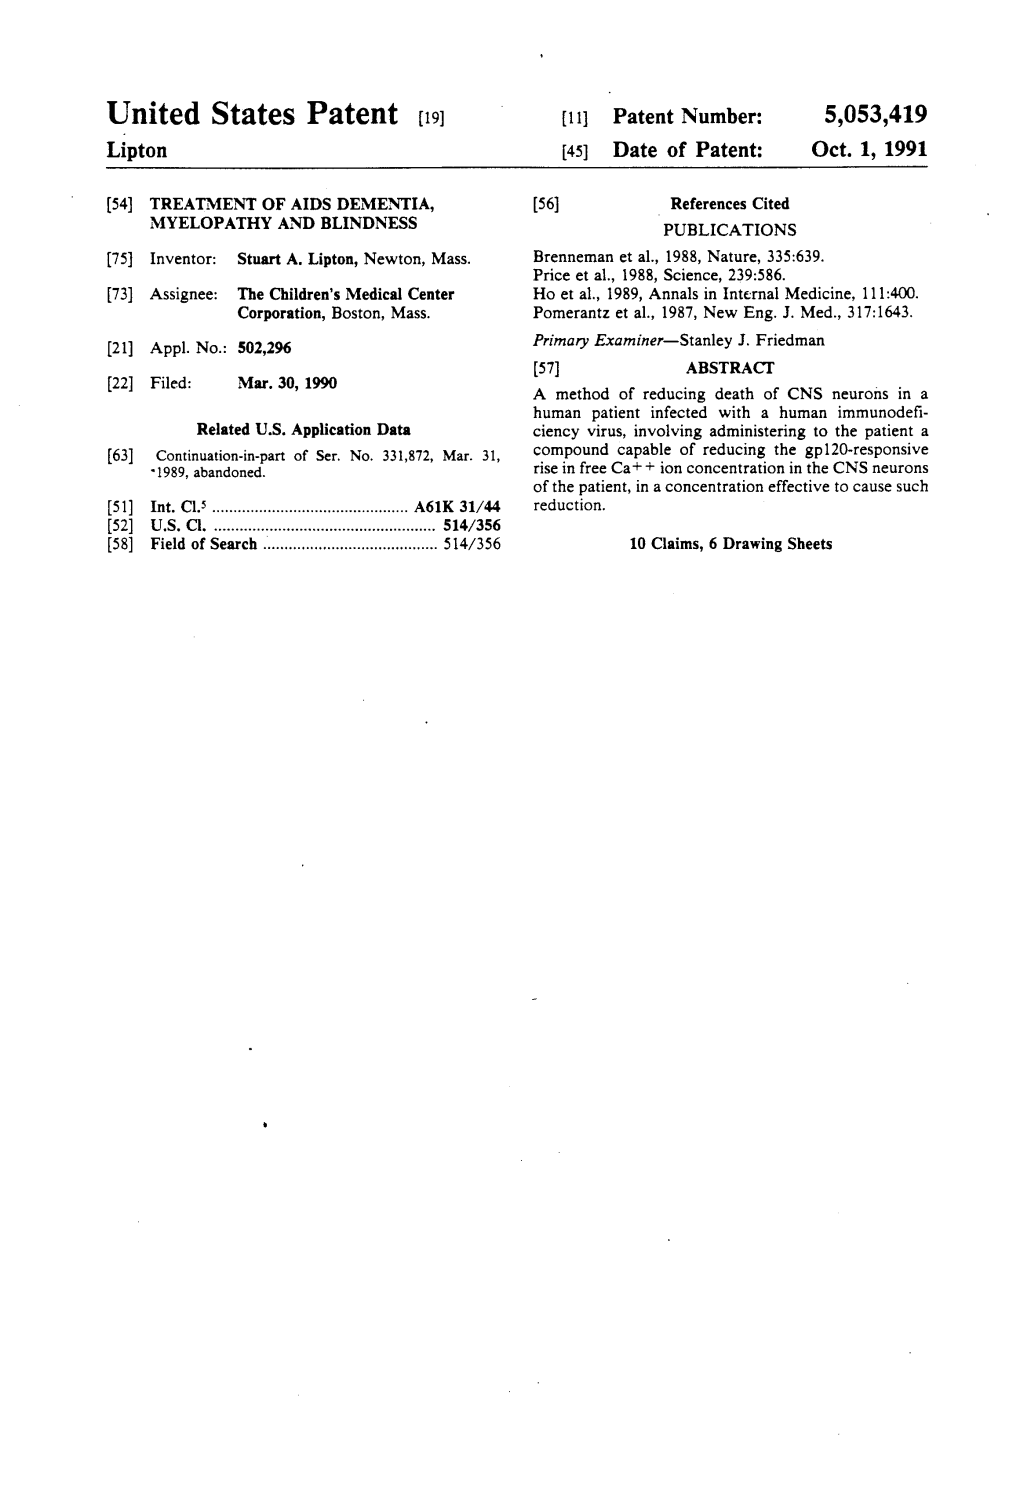 Ulllted States Patent [19] [11] Patent Number: 5,053,419 Lipton [45] Date of Patent: Oct